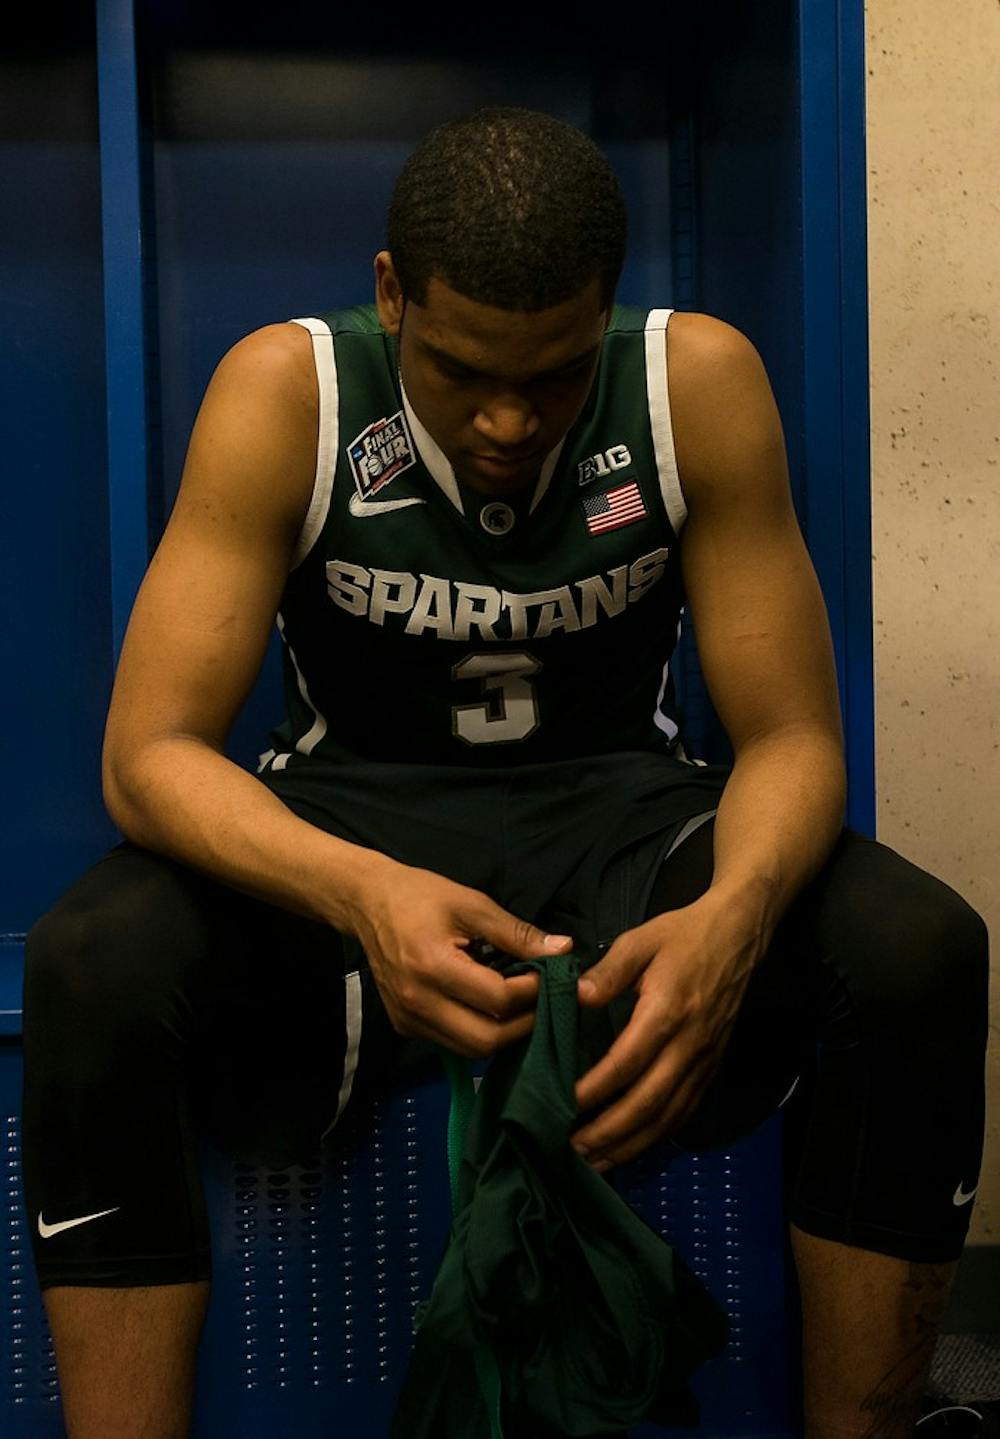 <p>Sophomore guard Alvin Ellis III sits in his locker April 4, 2015, after the semi-final game of the NCAA Tournament in the Final Four round at Lucas Oil Stadium in Indianapolis, Indiana. The Spartans were defeated by the Blue Devils, 81-61. Erin Hampton/The State News</p>